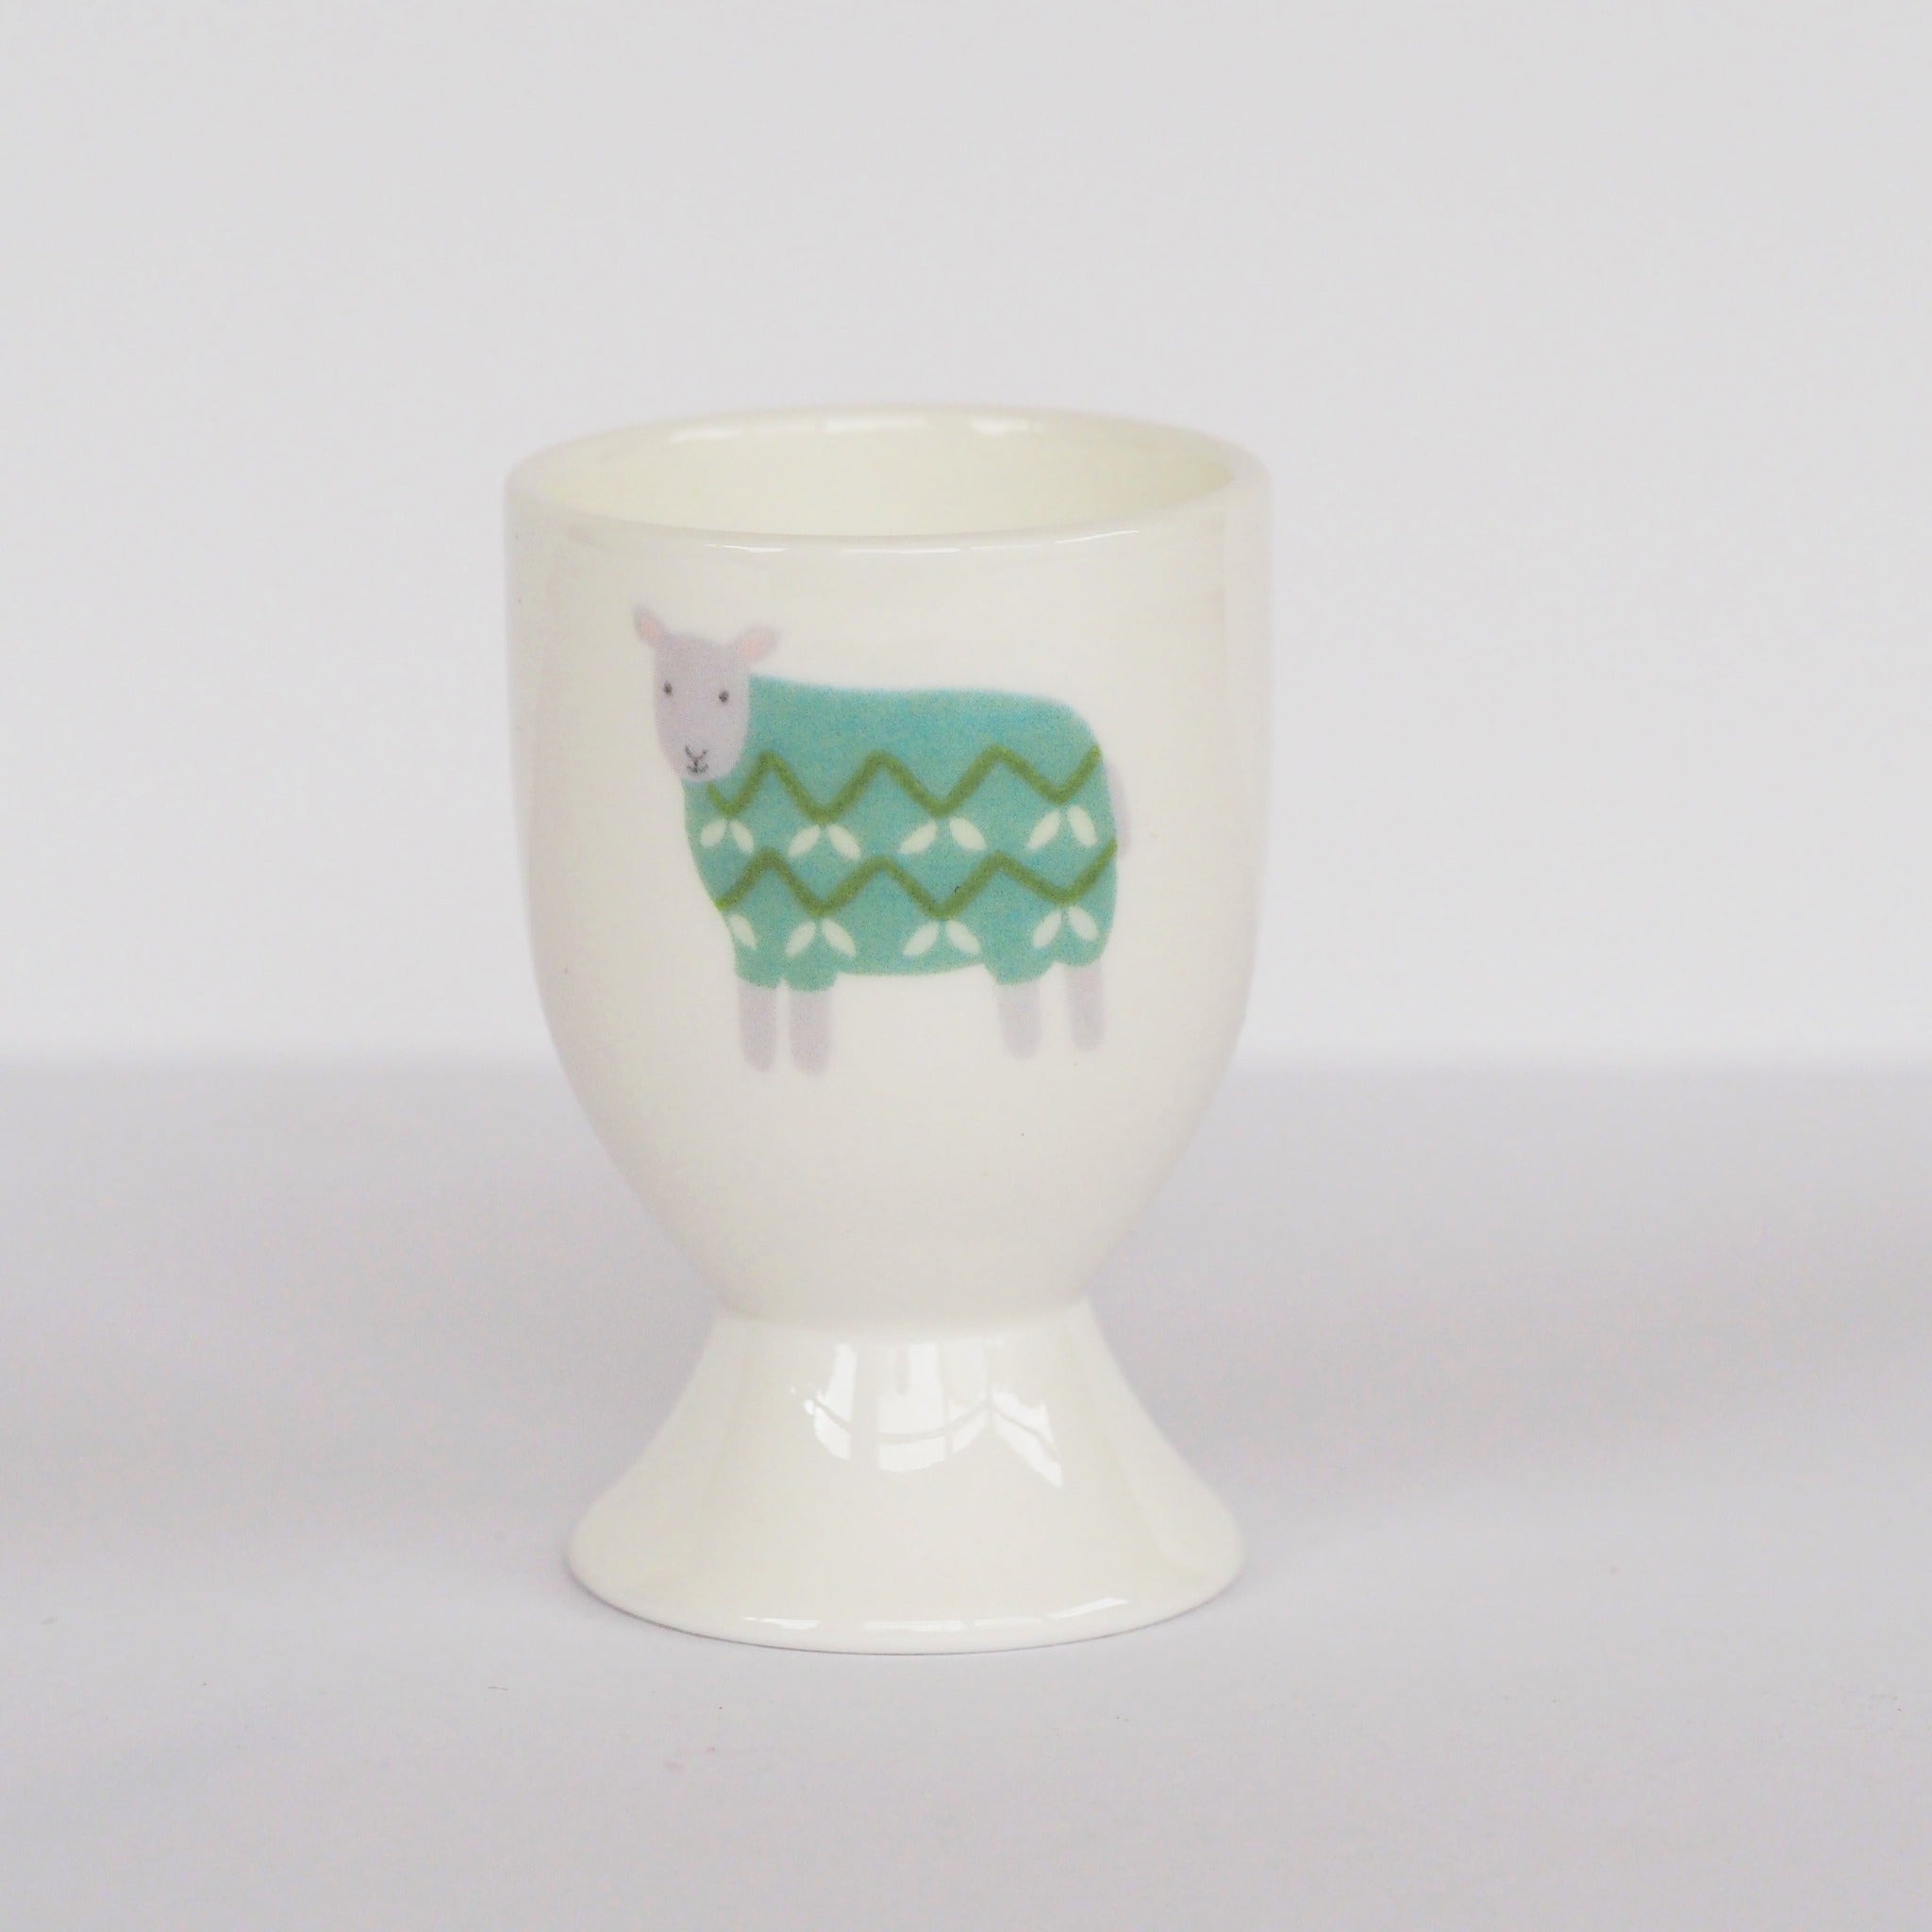 Green Sheep Egg Cup by Mary Kilvert